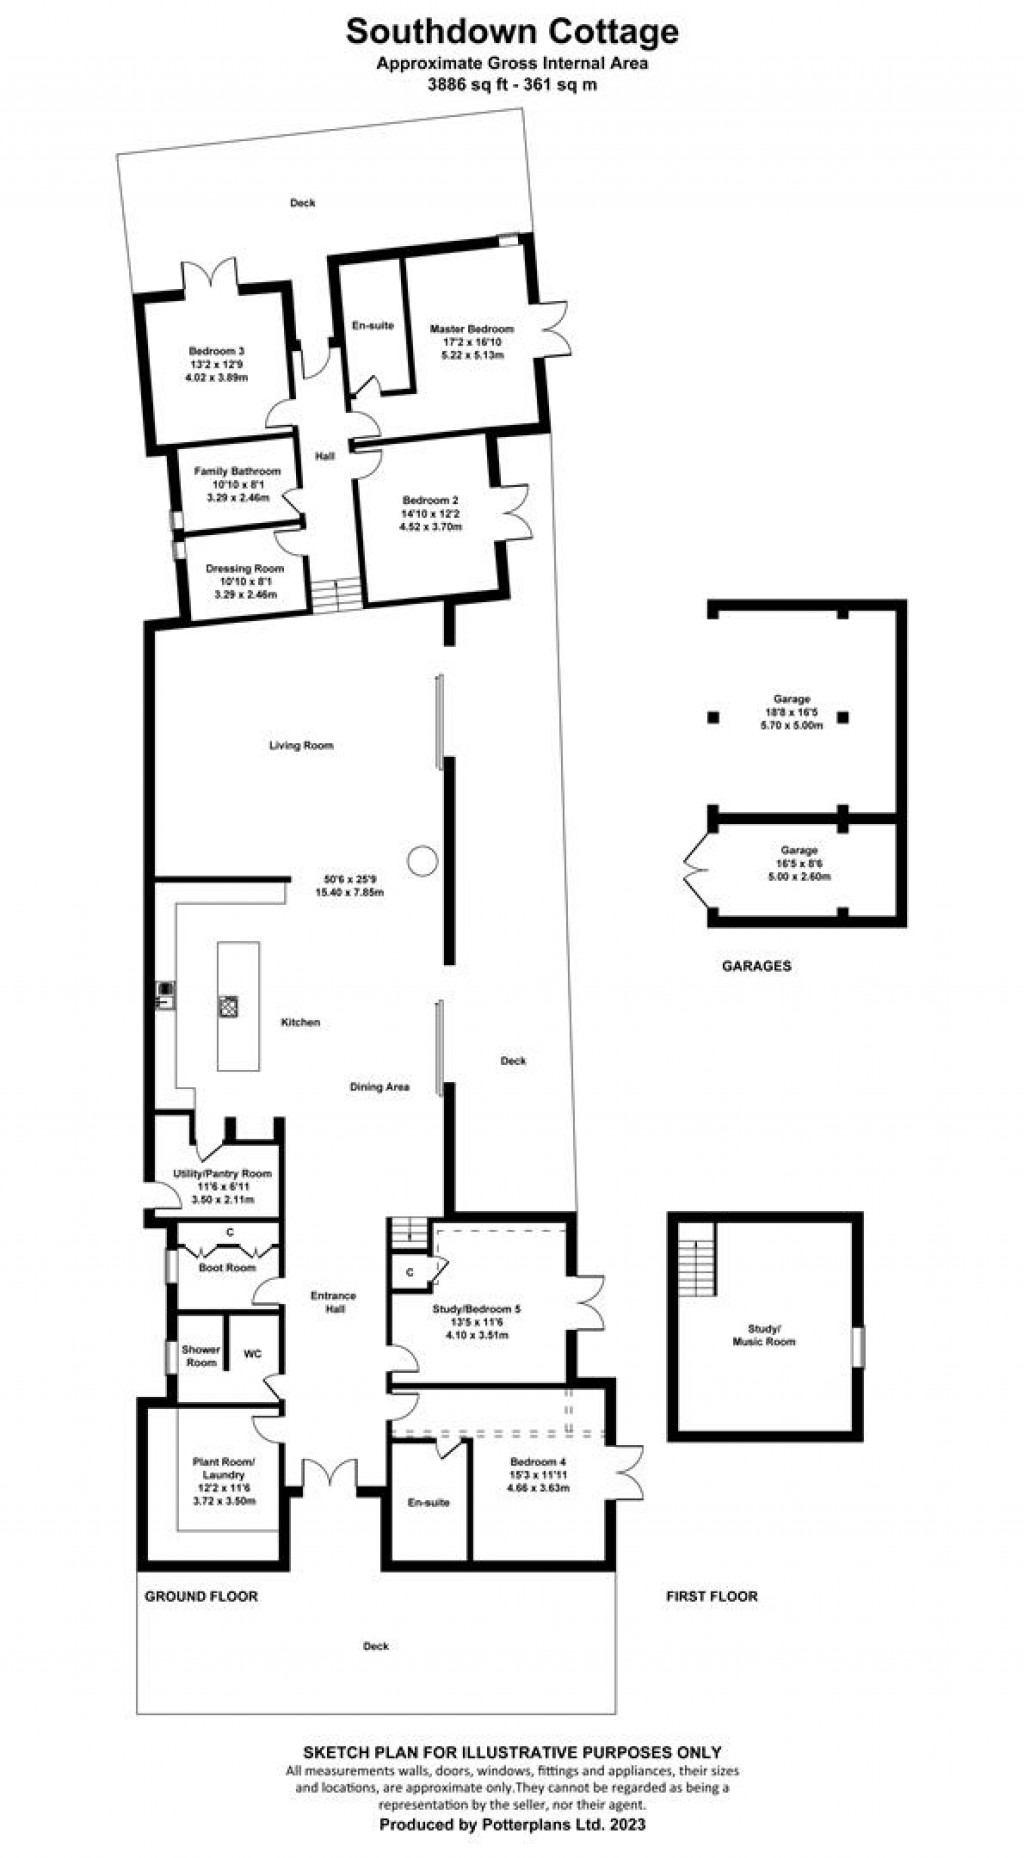 Floorplans For Chale, Isle of Wight